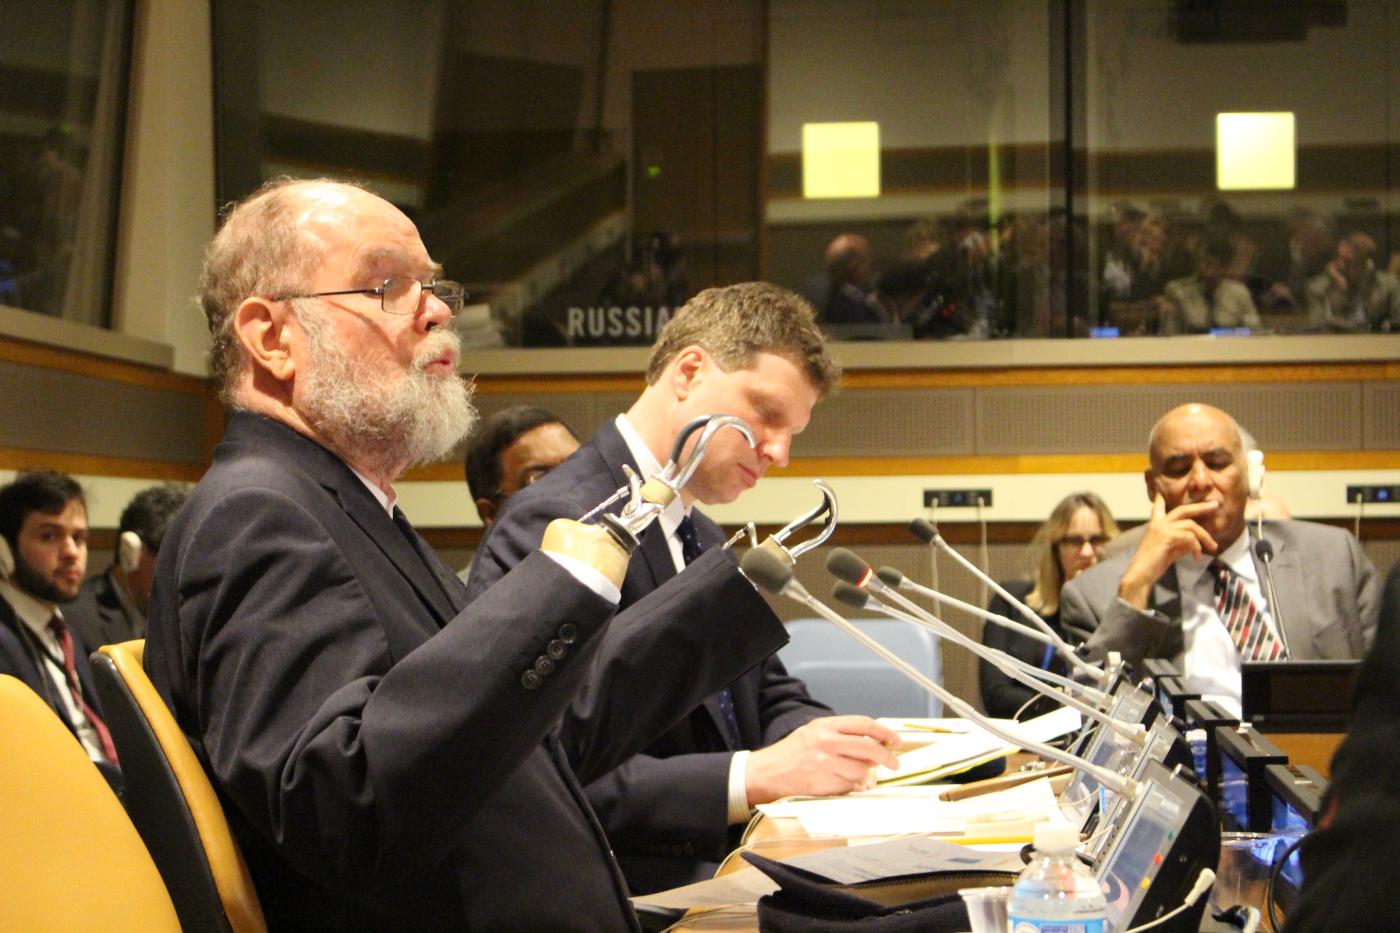 Fr. Michael Lapsley addresses the participants of the panel held at the UN headquarters in New York. ©Marcelo Schneider/WCC